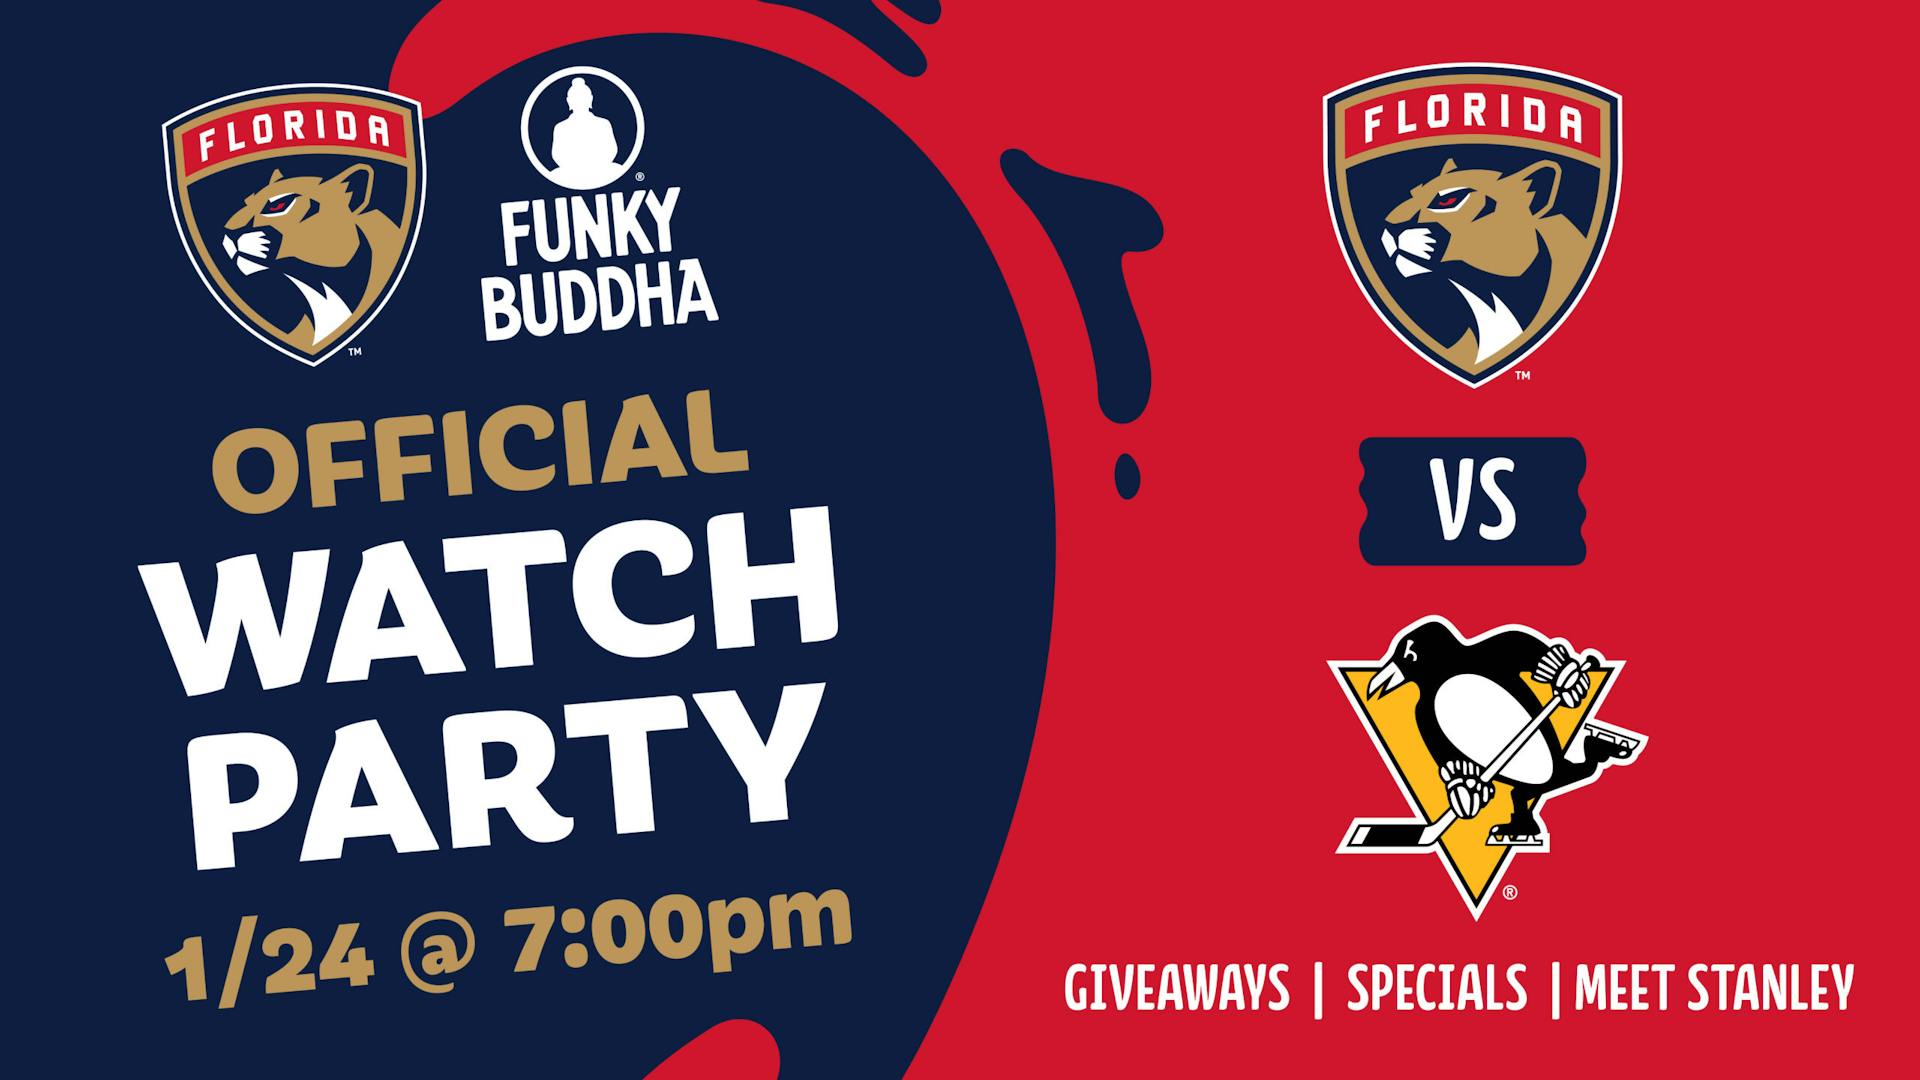 Panthers vs Penguins watch party